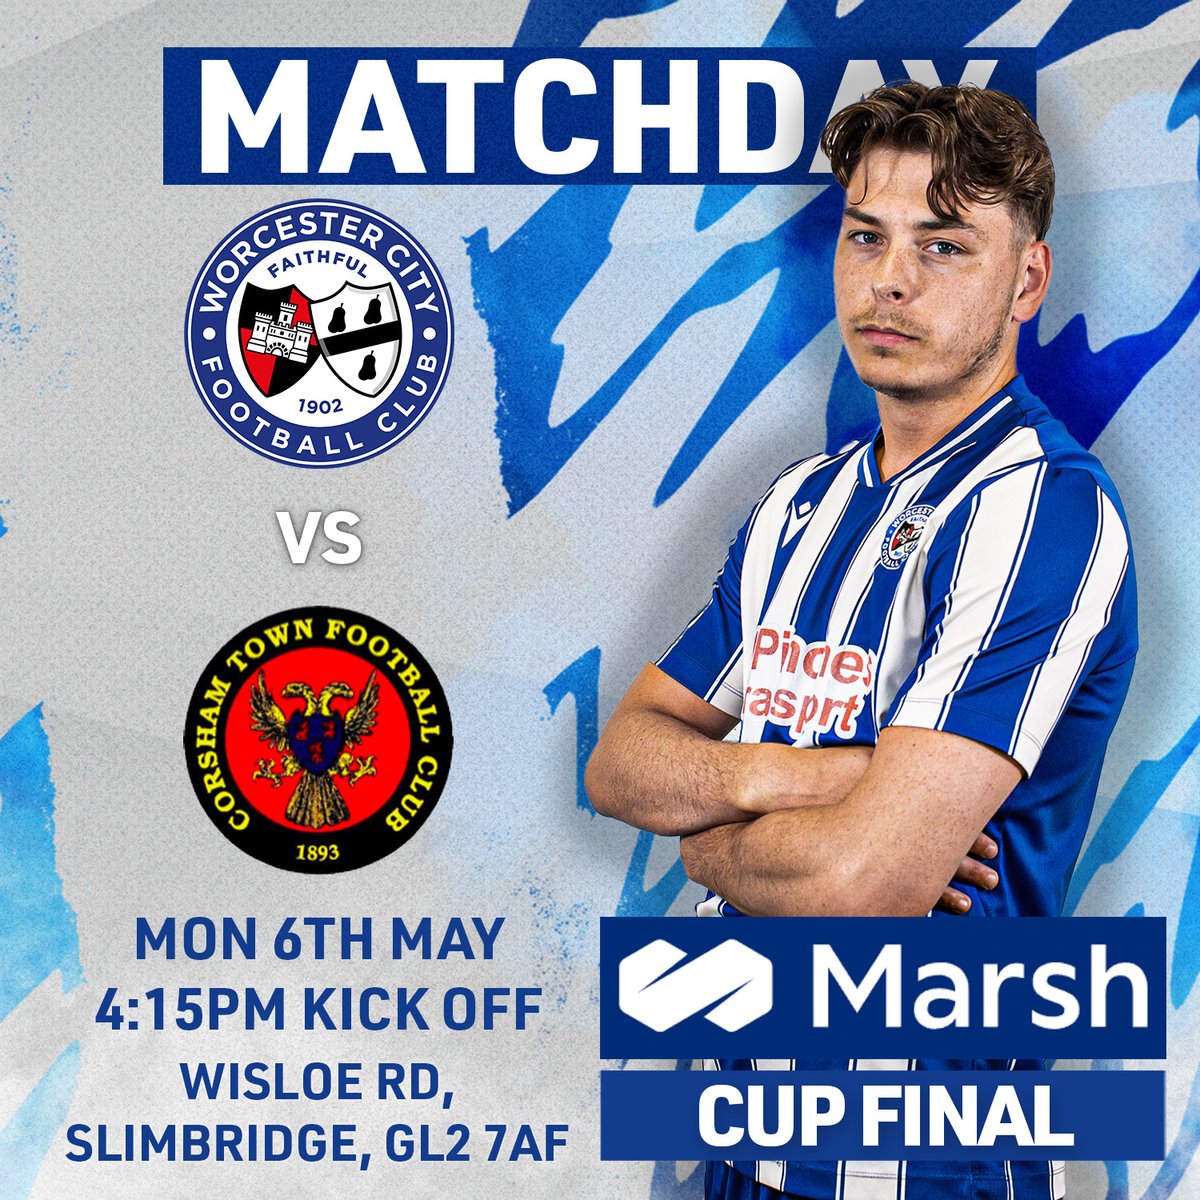 Up Next: We go in hunt of the Treble as we face off against @CorshamTownFC on Bank Holiday Monday in the Marsh Challenge Cup Final. 🎟️: Cash/Card on the gate